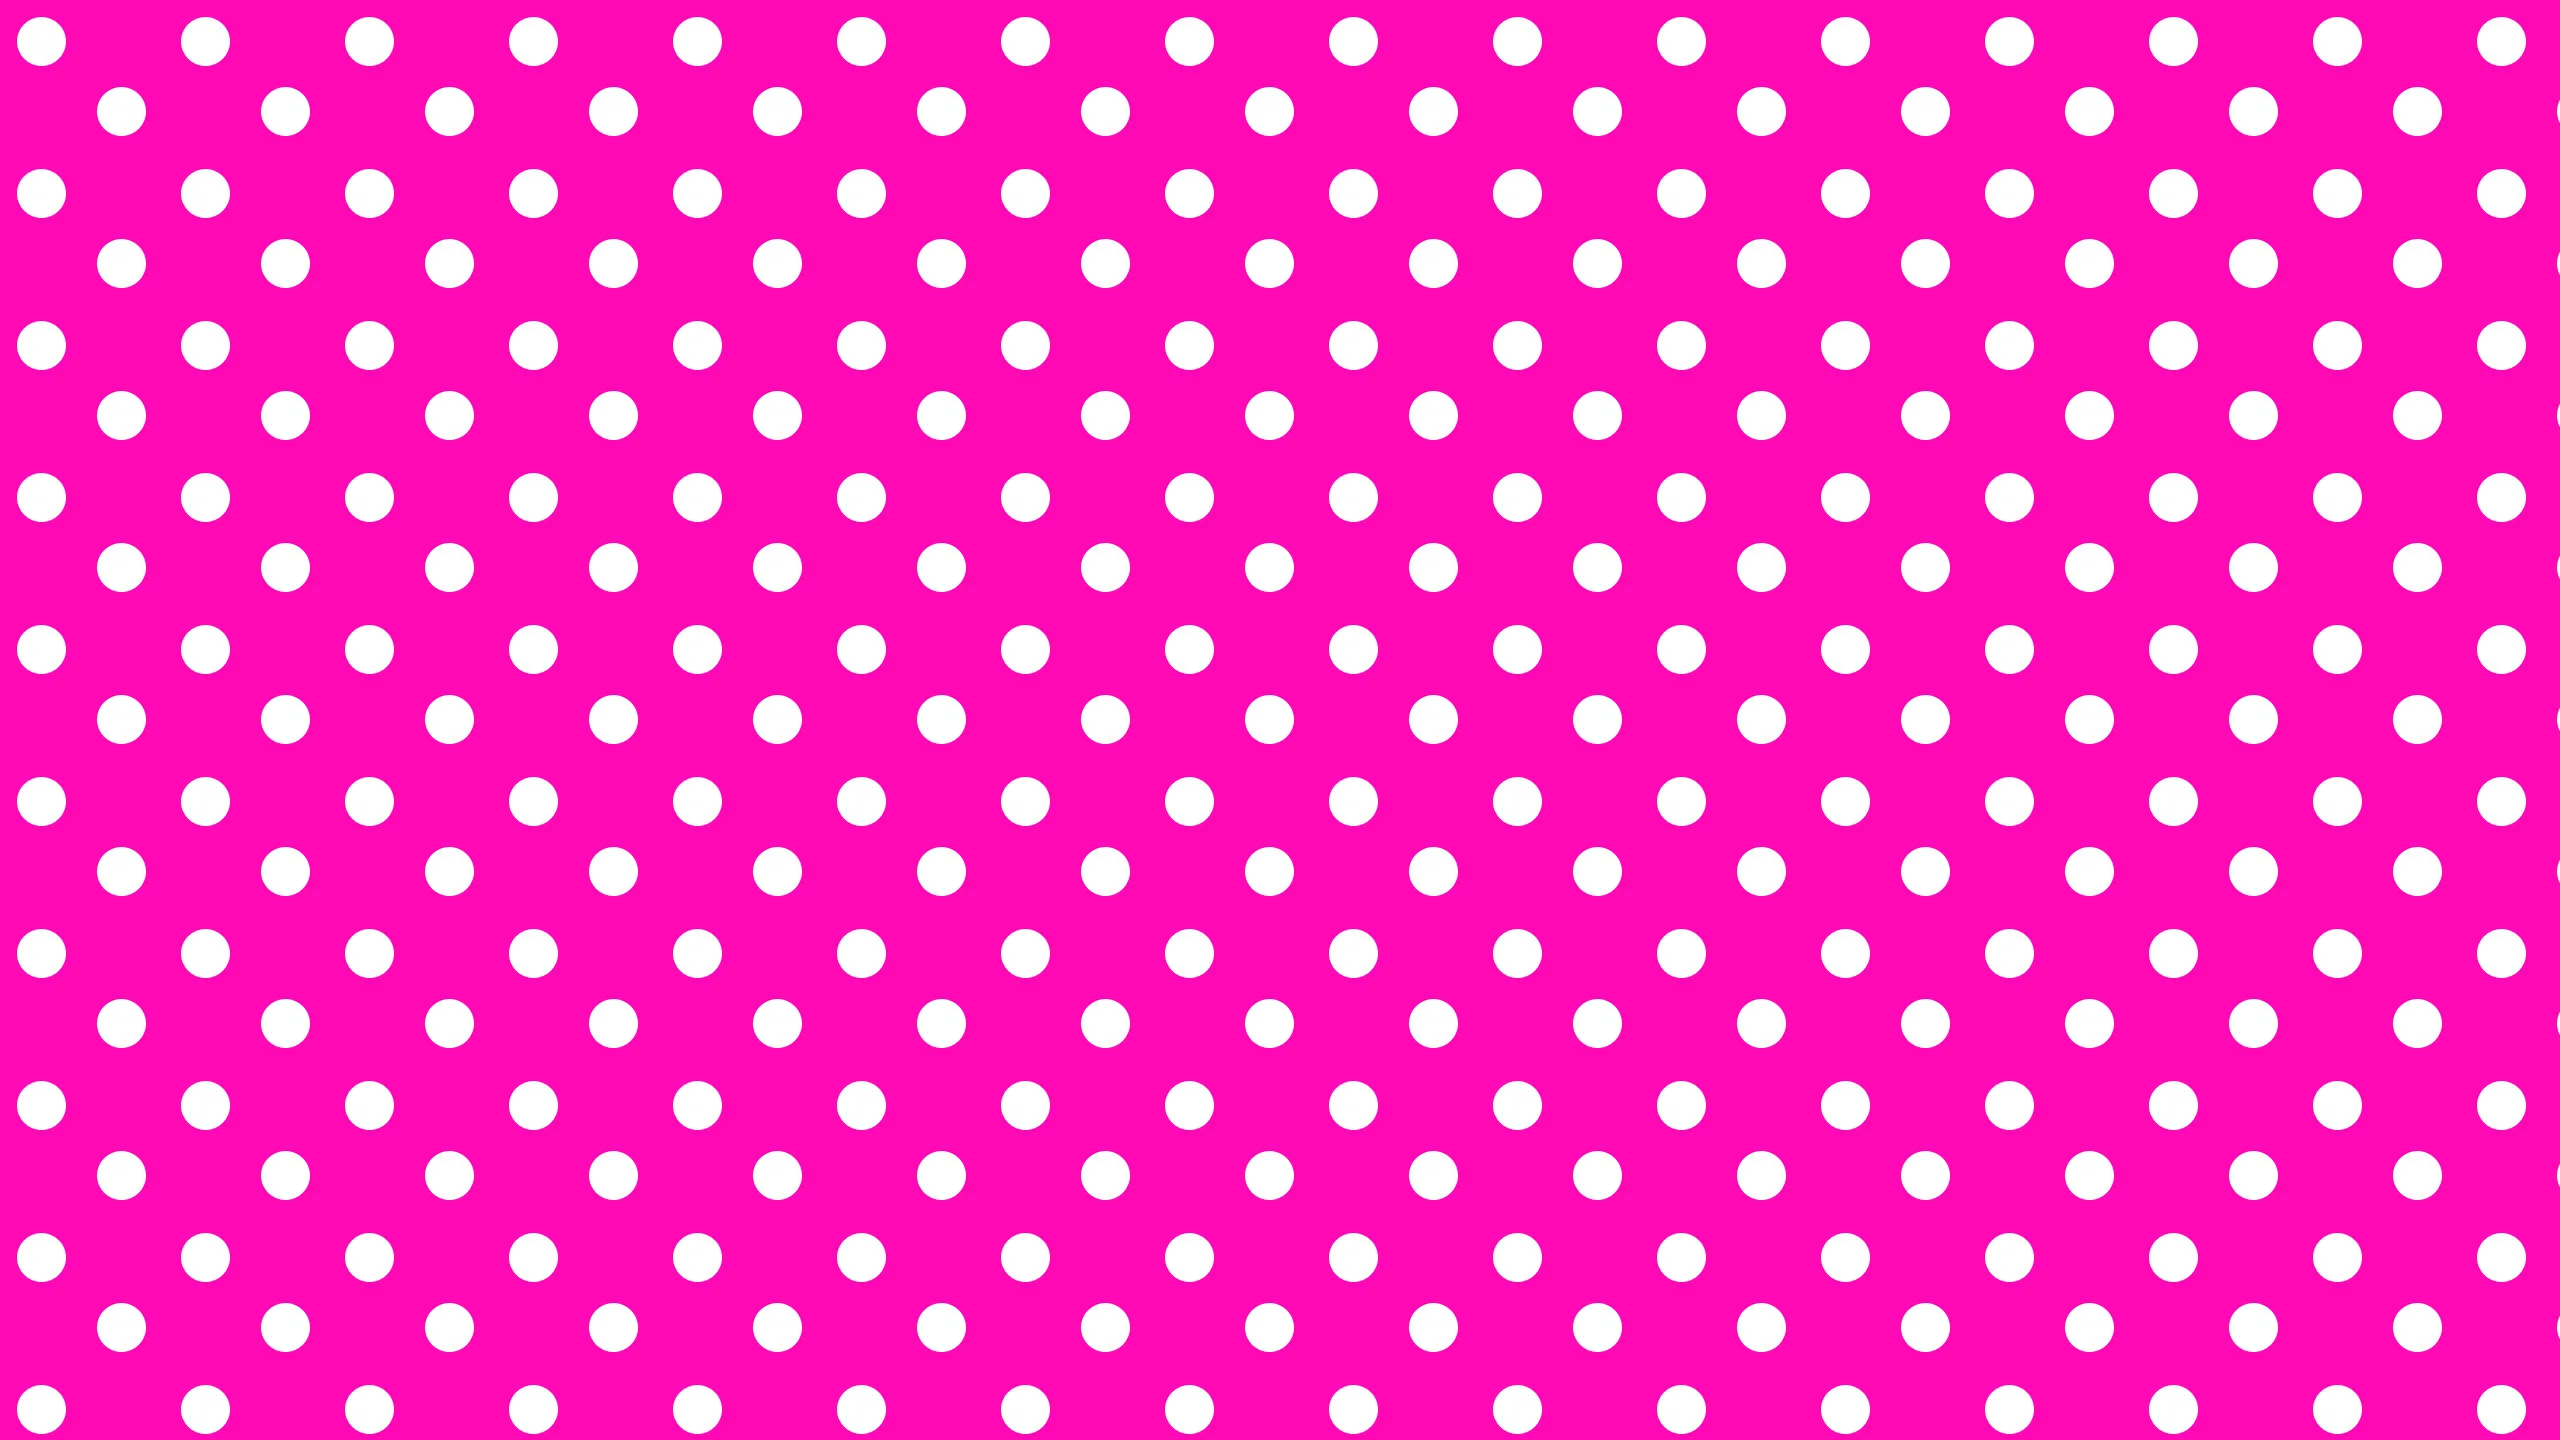 Blue Fabric With White Polka Dots wallpaper – 1369402